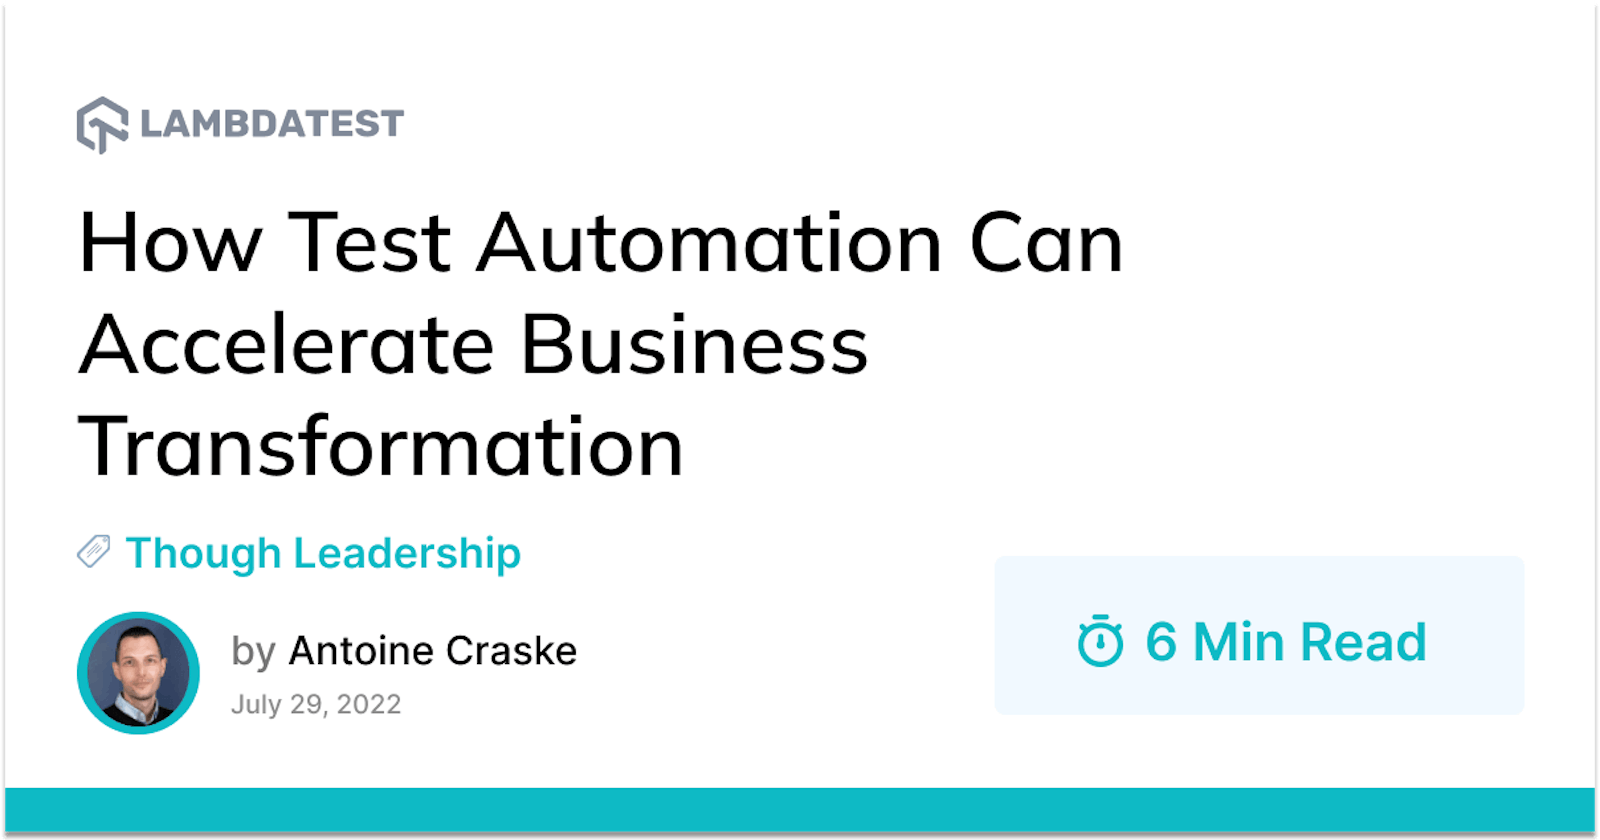 How Test Automation Can Accelerate Business Transformation